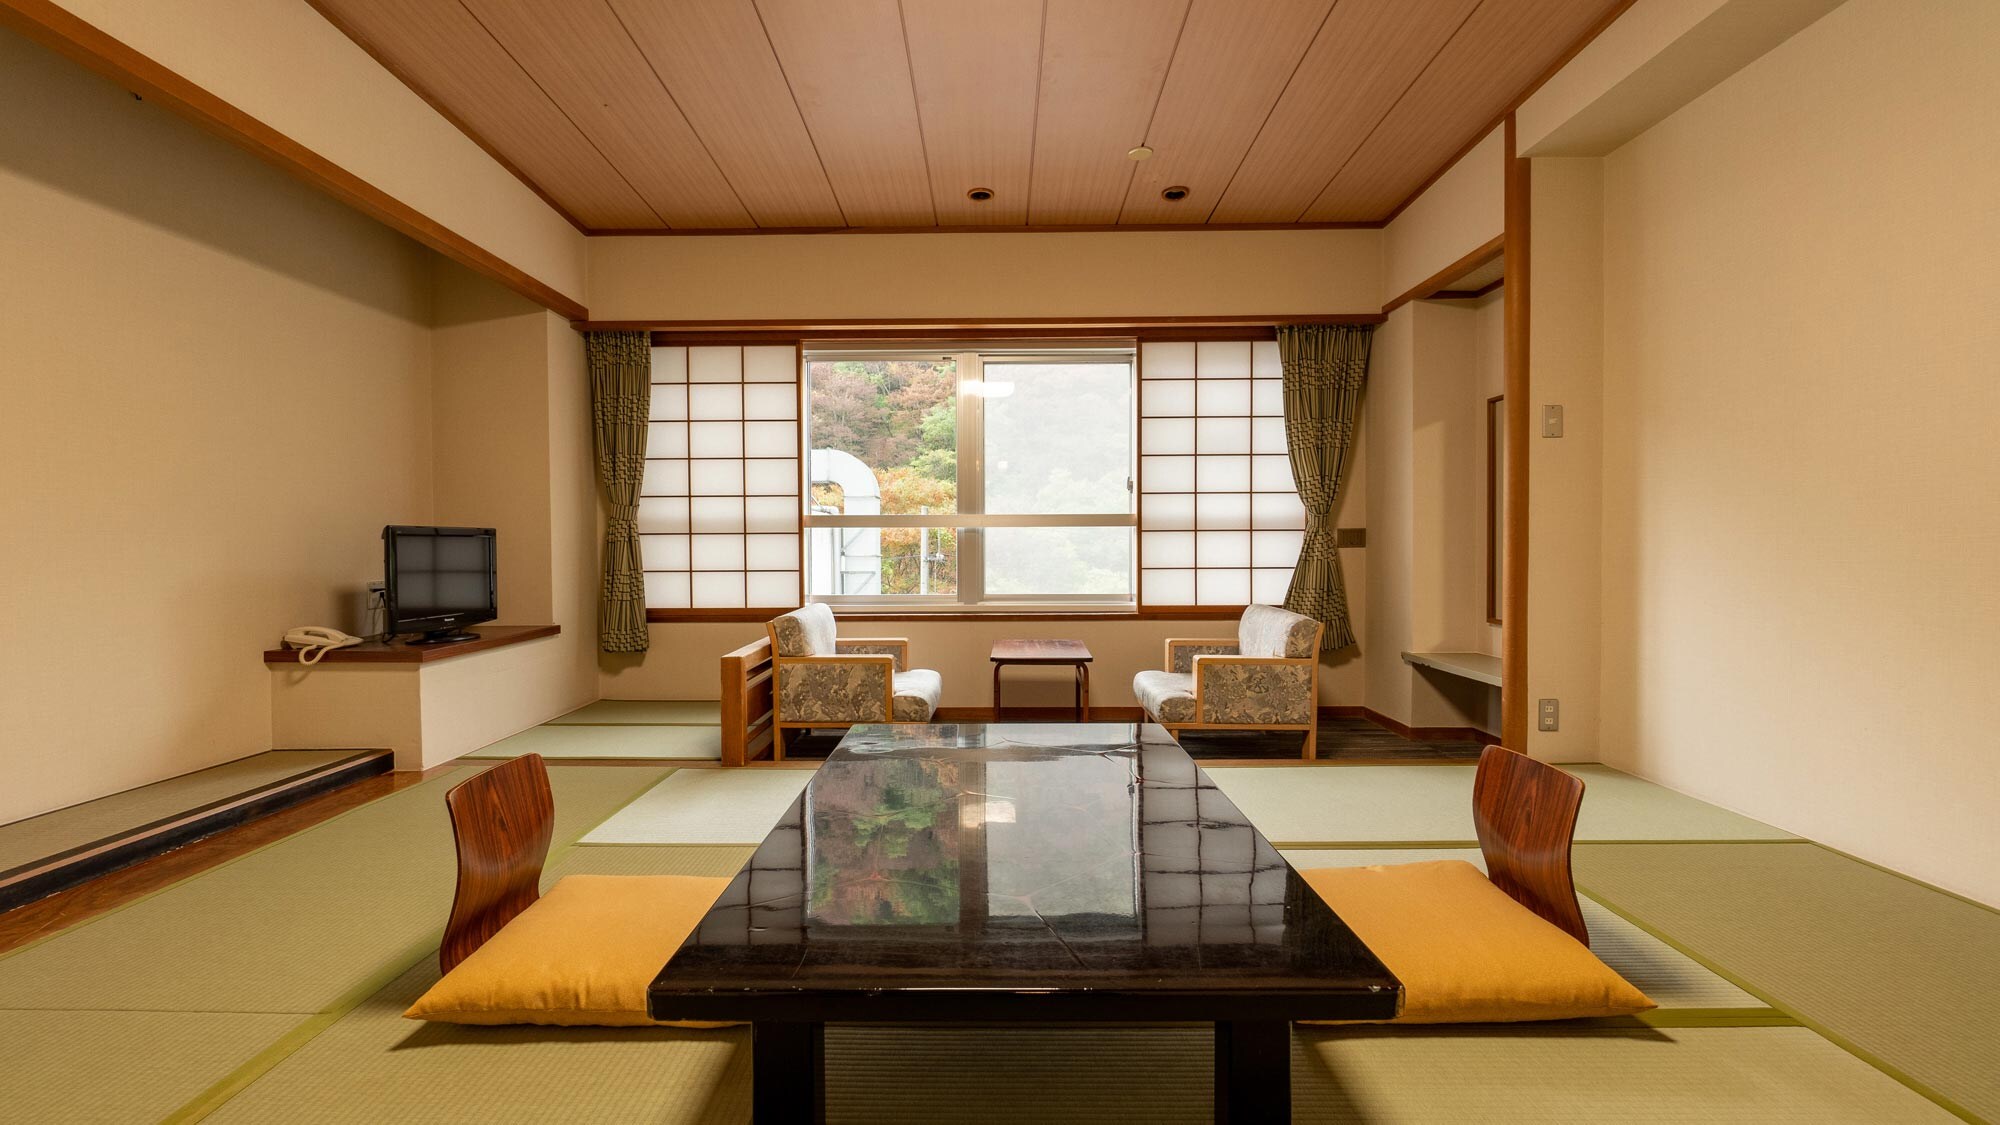 Old building-Japanese-style room 10 tatami mats